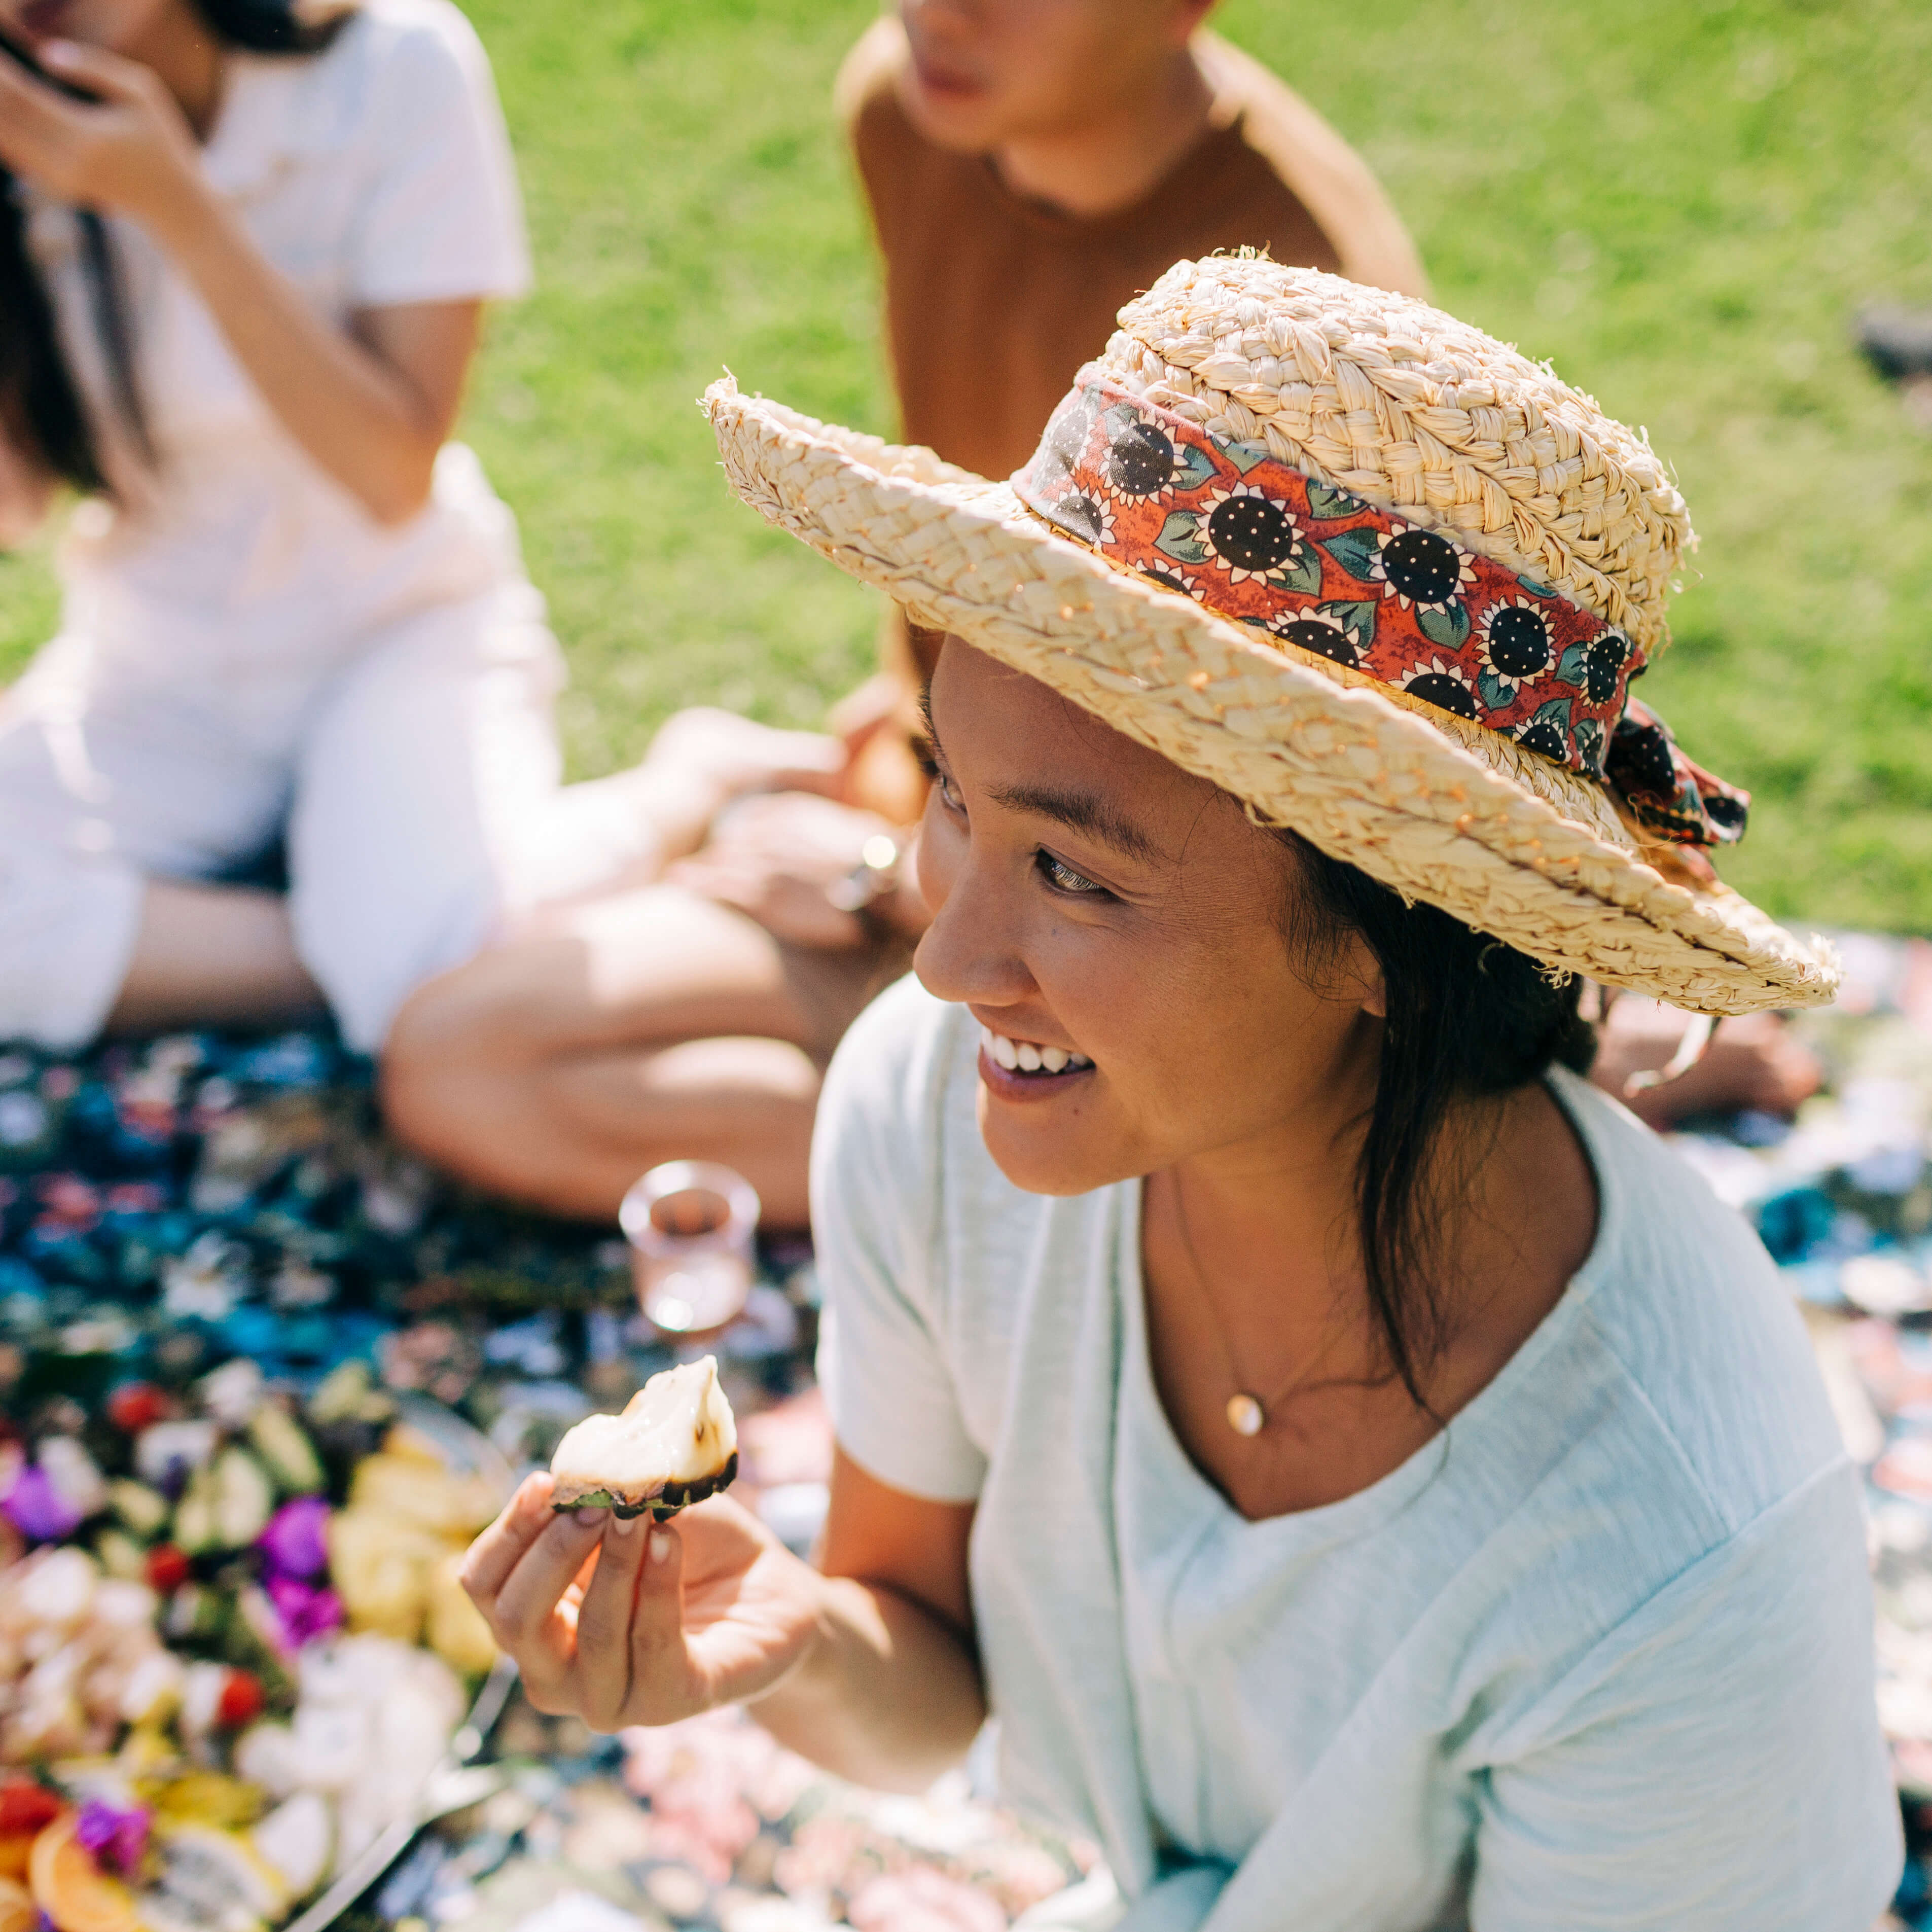 smiling woman with a straw hat on sitting at a picnic with food in her hand.